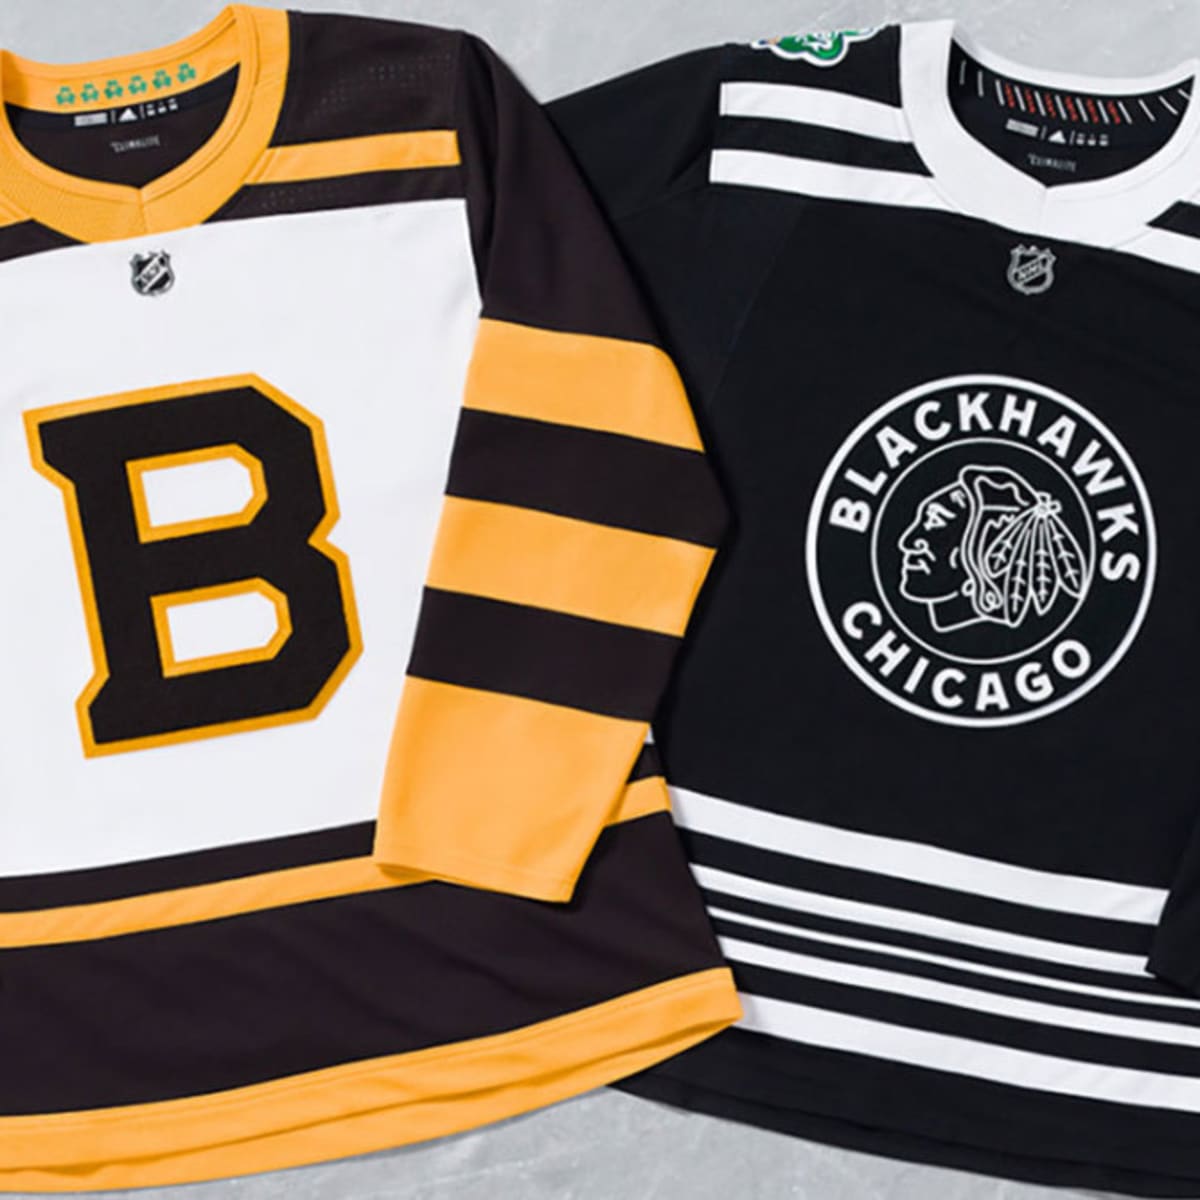 3 takeaways from the Bruins' Winter Classic win over the Blackhawks